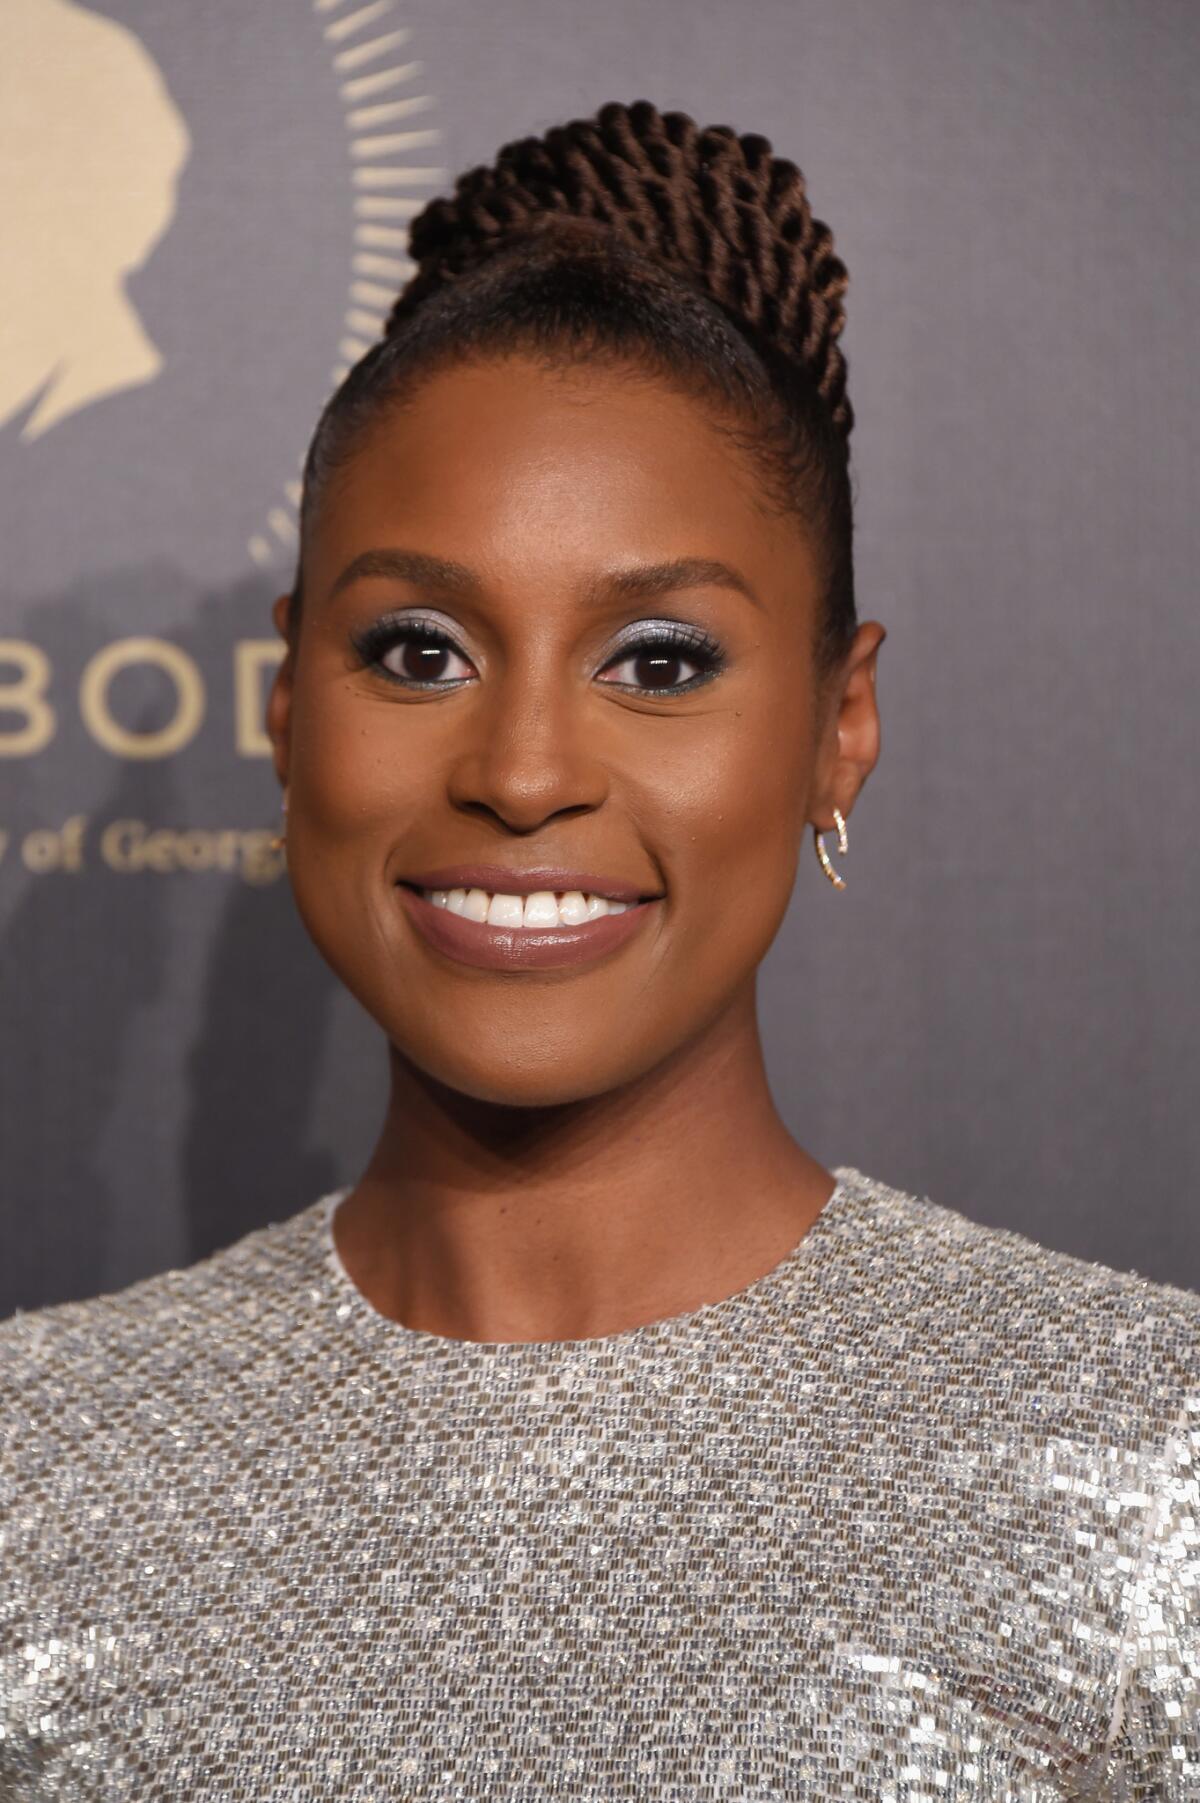 "Insecure" creator and star Issa Rae attends the 77th Annual Peabody Awards Ceremony in May.